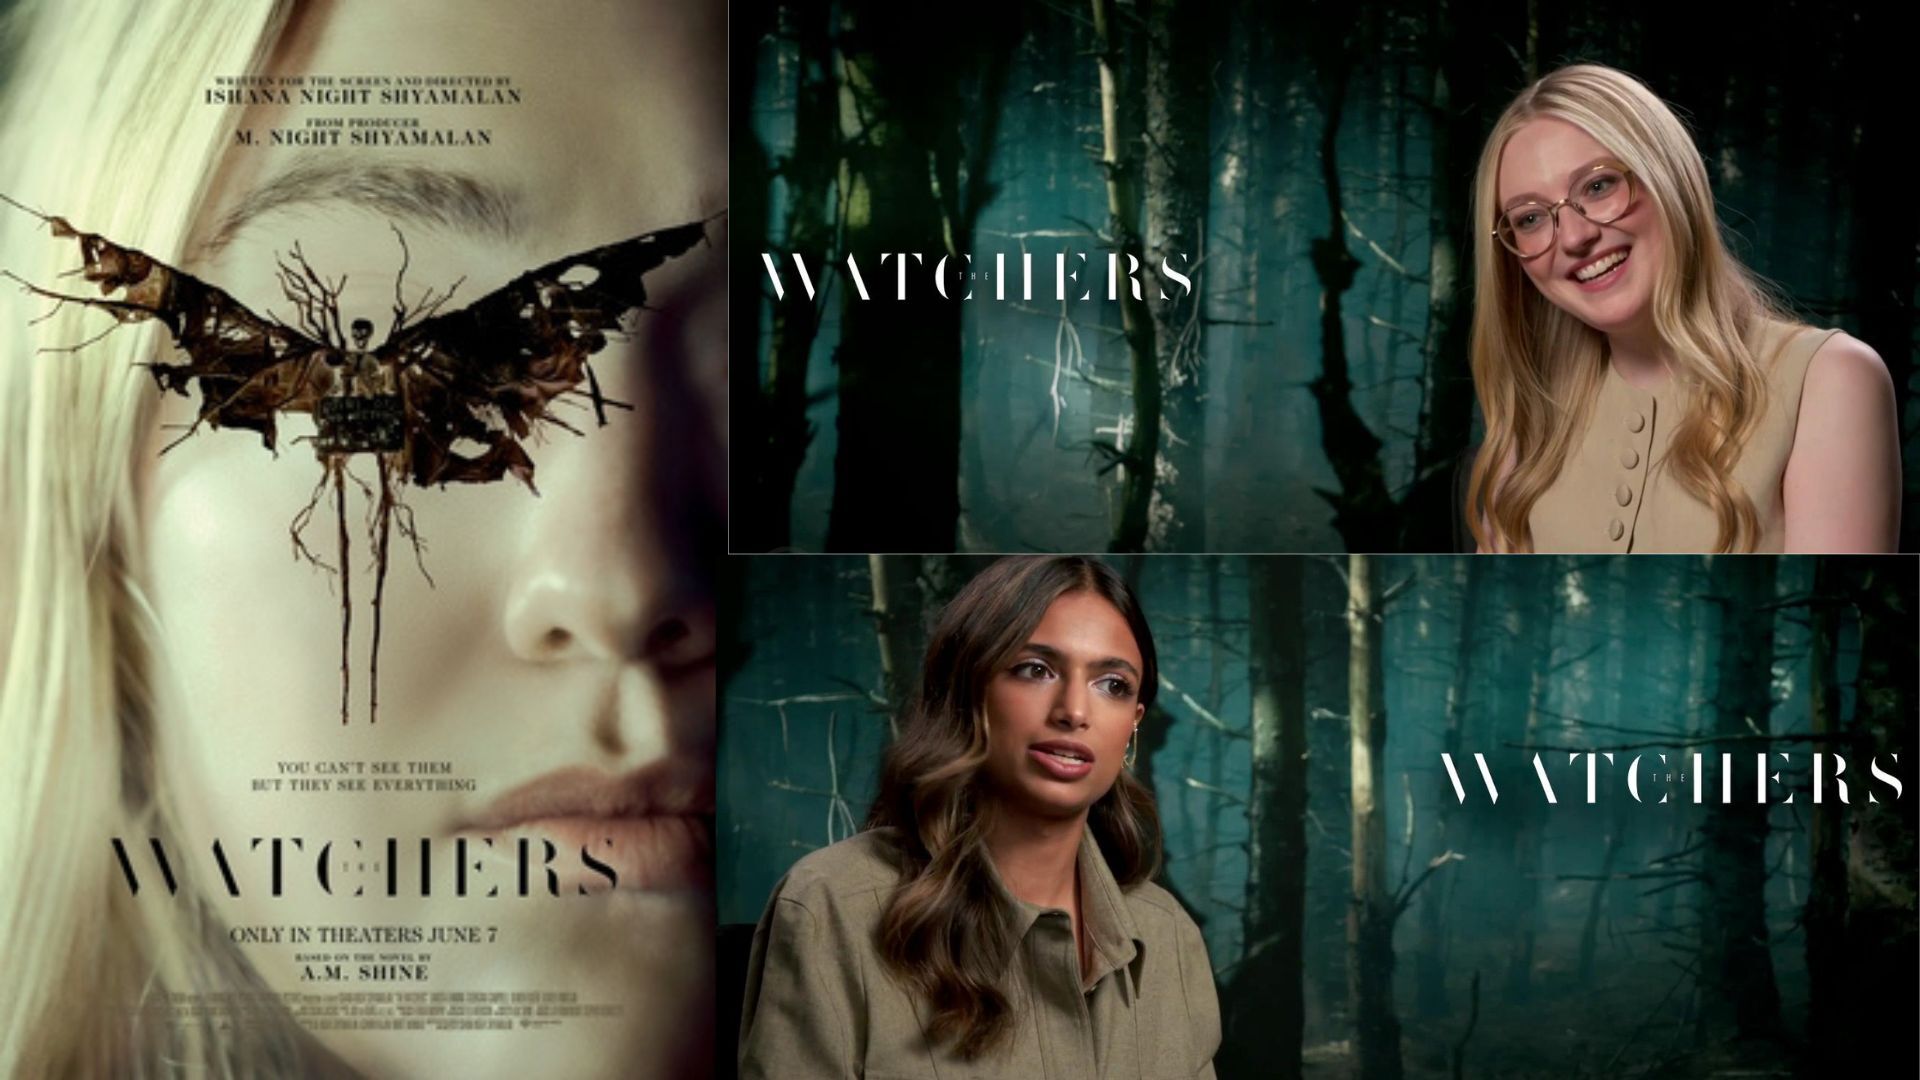 New horror movie 'The Watchers' will give you chills